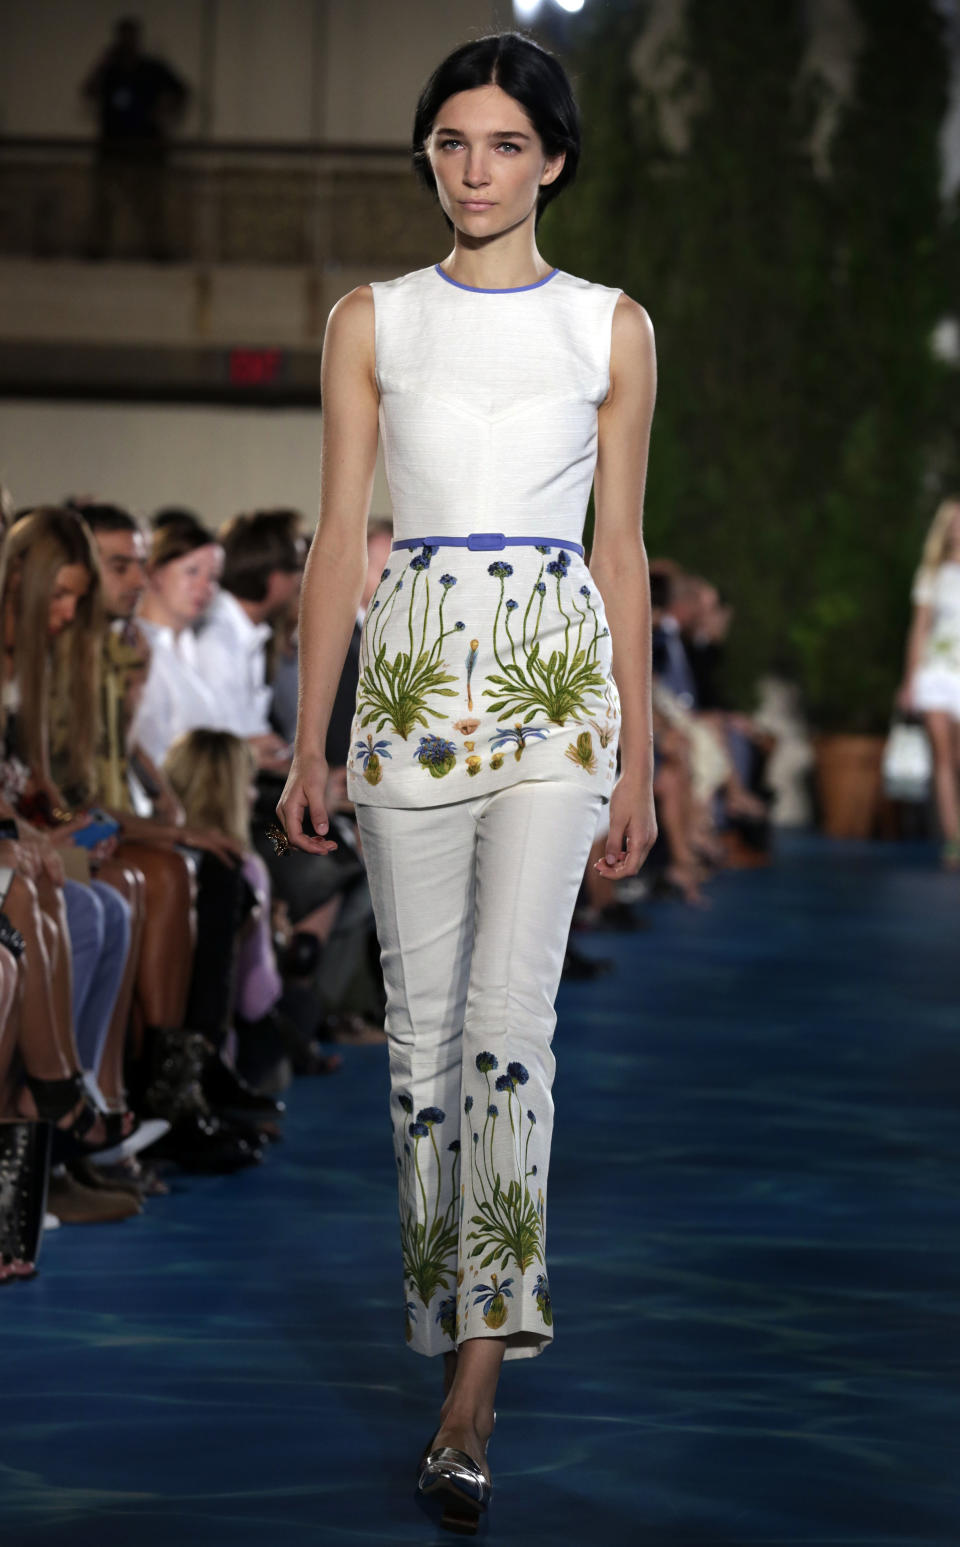 The Tory Burch Spring 2014 collection is modeled during Fashion Week in New York, Tuesday, Sept. 10, 2013. (AP Photo/Richard Drew)